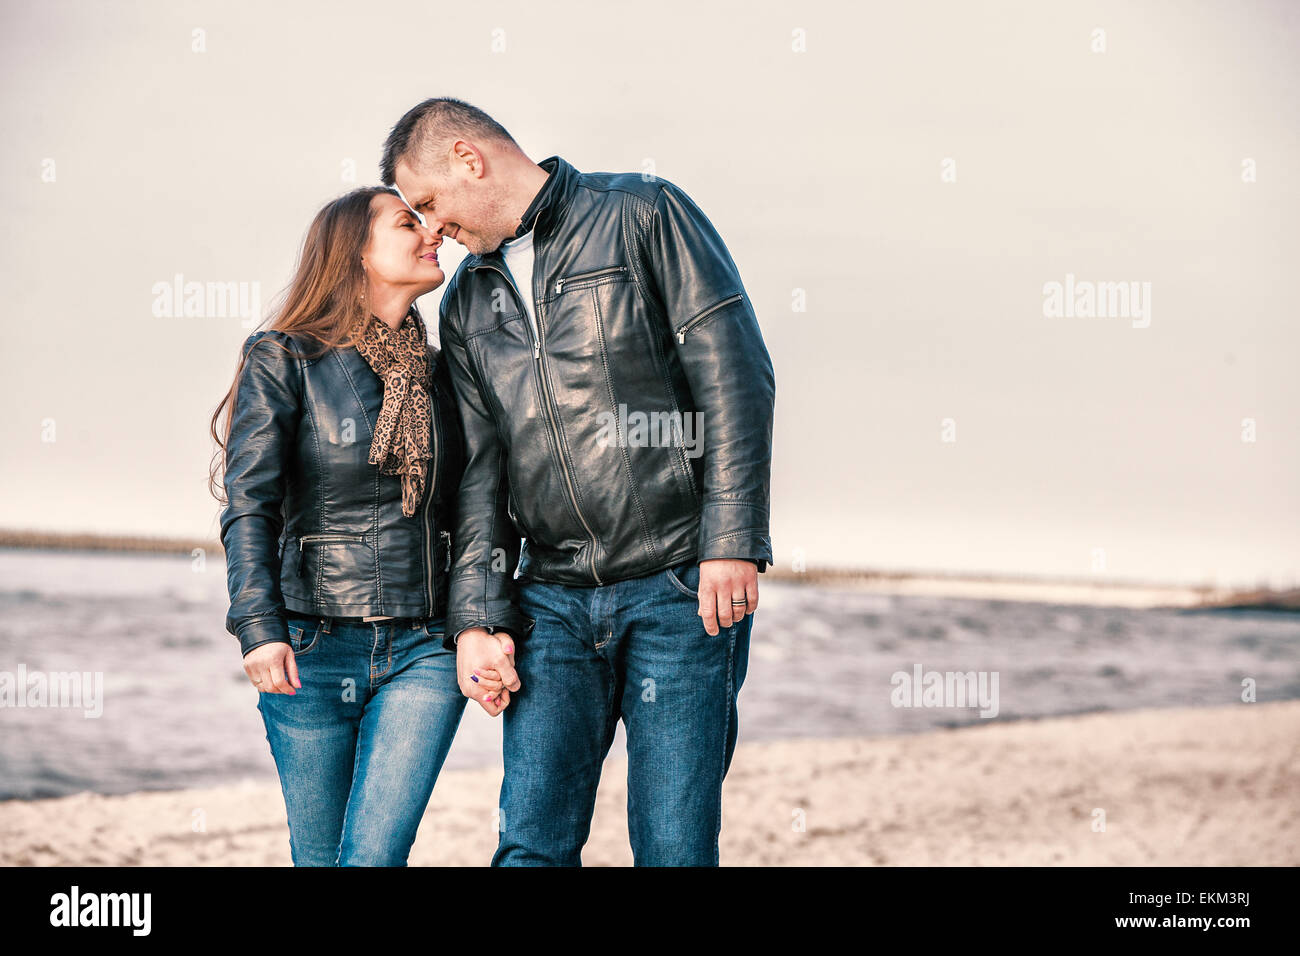 Middle age couple on the beach Stock Photo